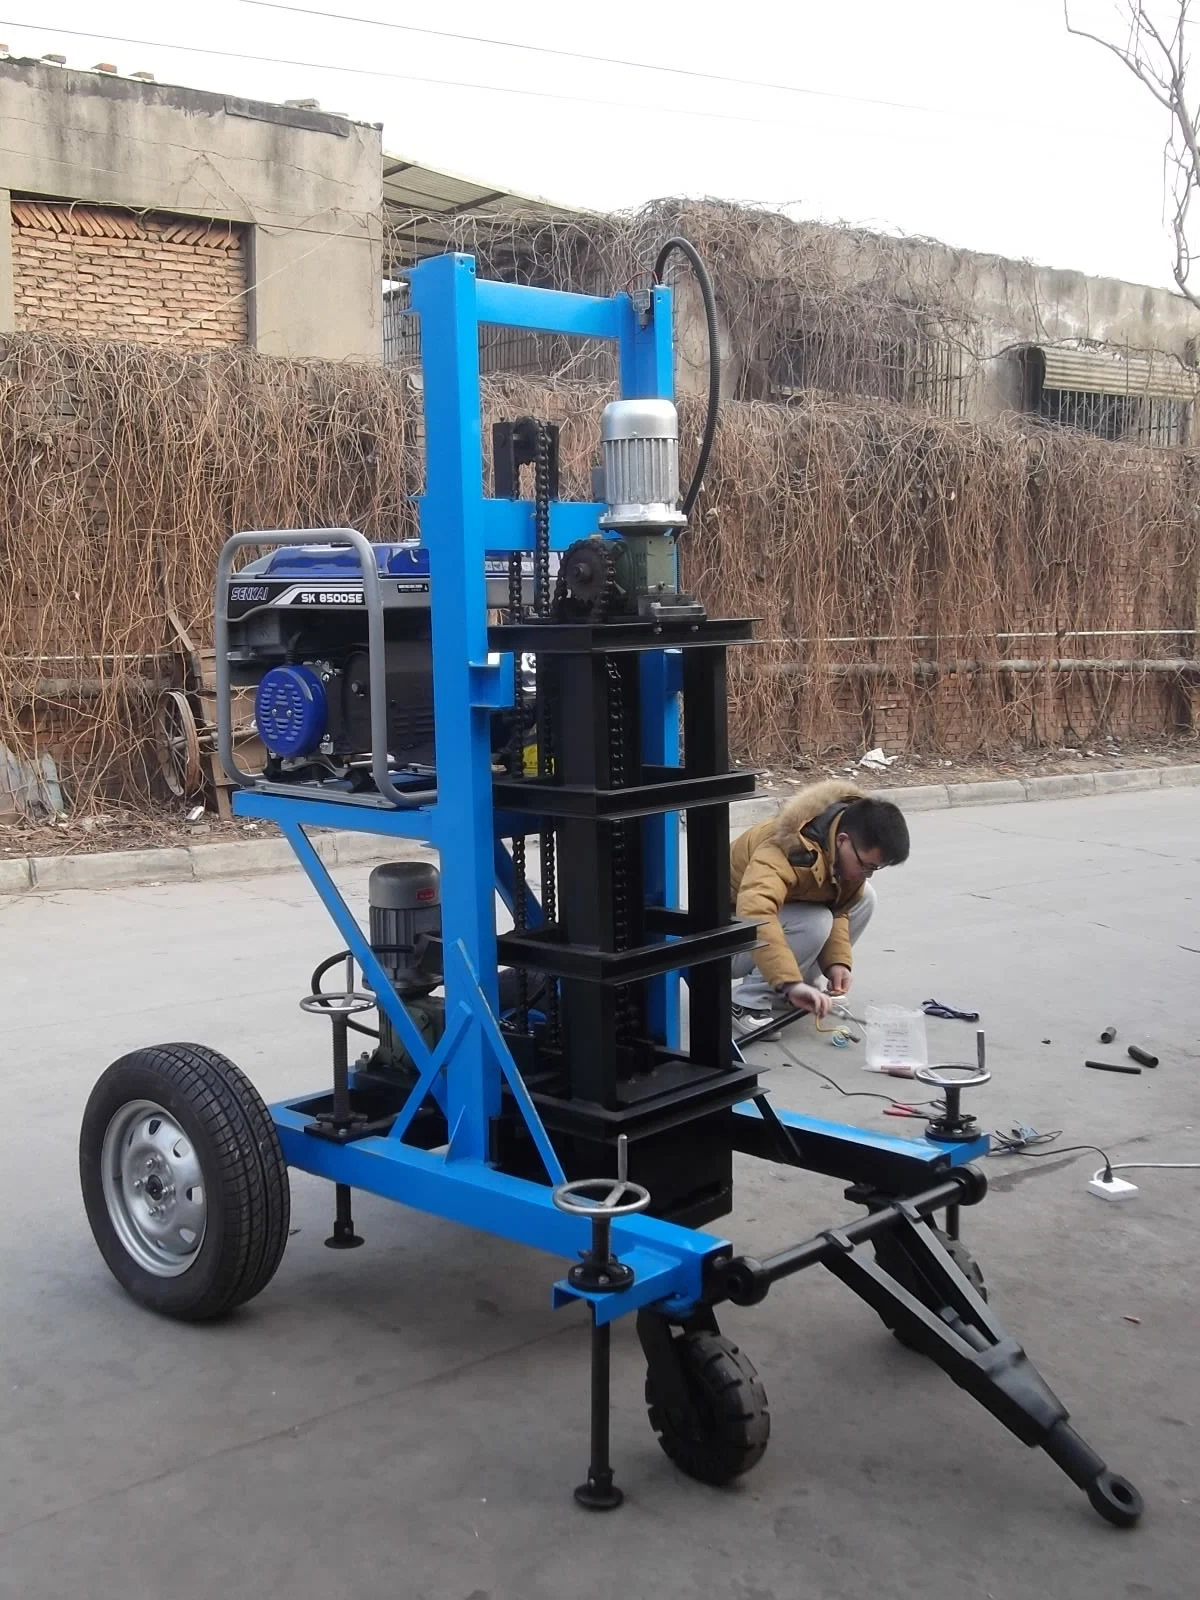 C126 Electrical Standard Penetration Test (SPT) Apparatus for Soil Field Strength Analysis